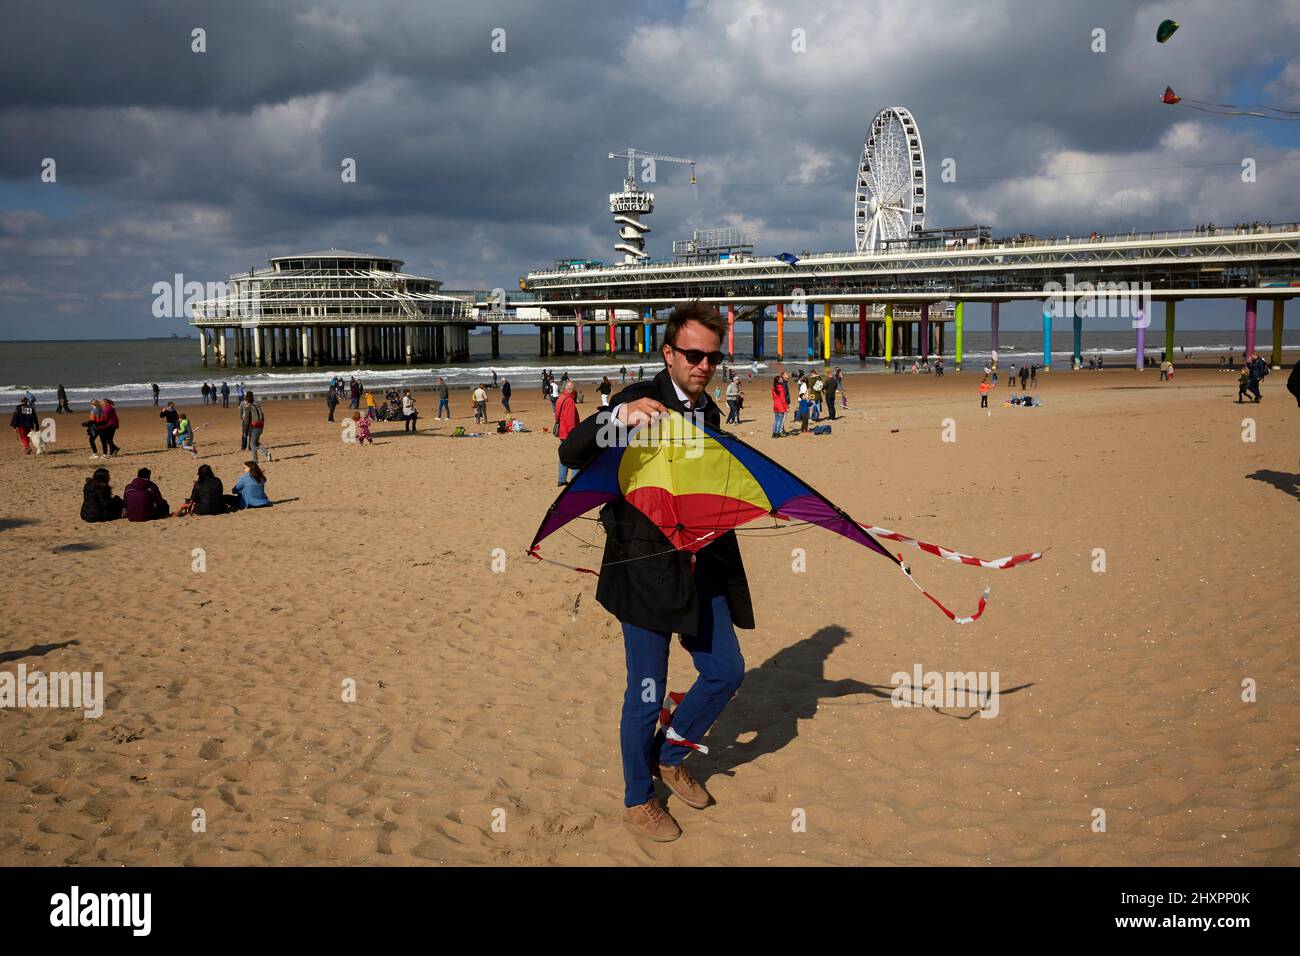 An assistant to the event participates with his small kite Stock Photo